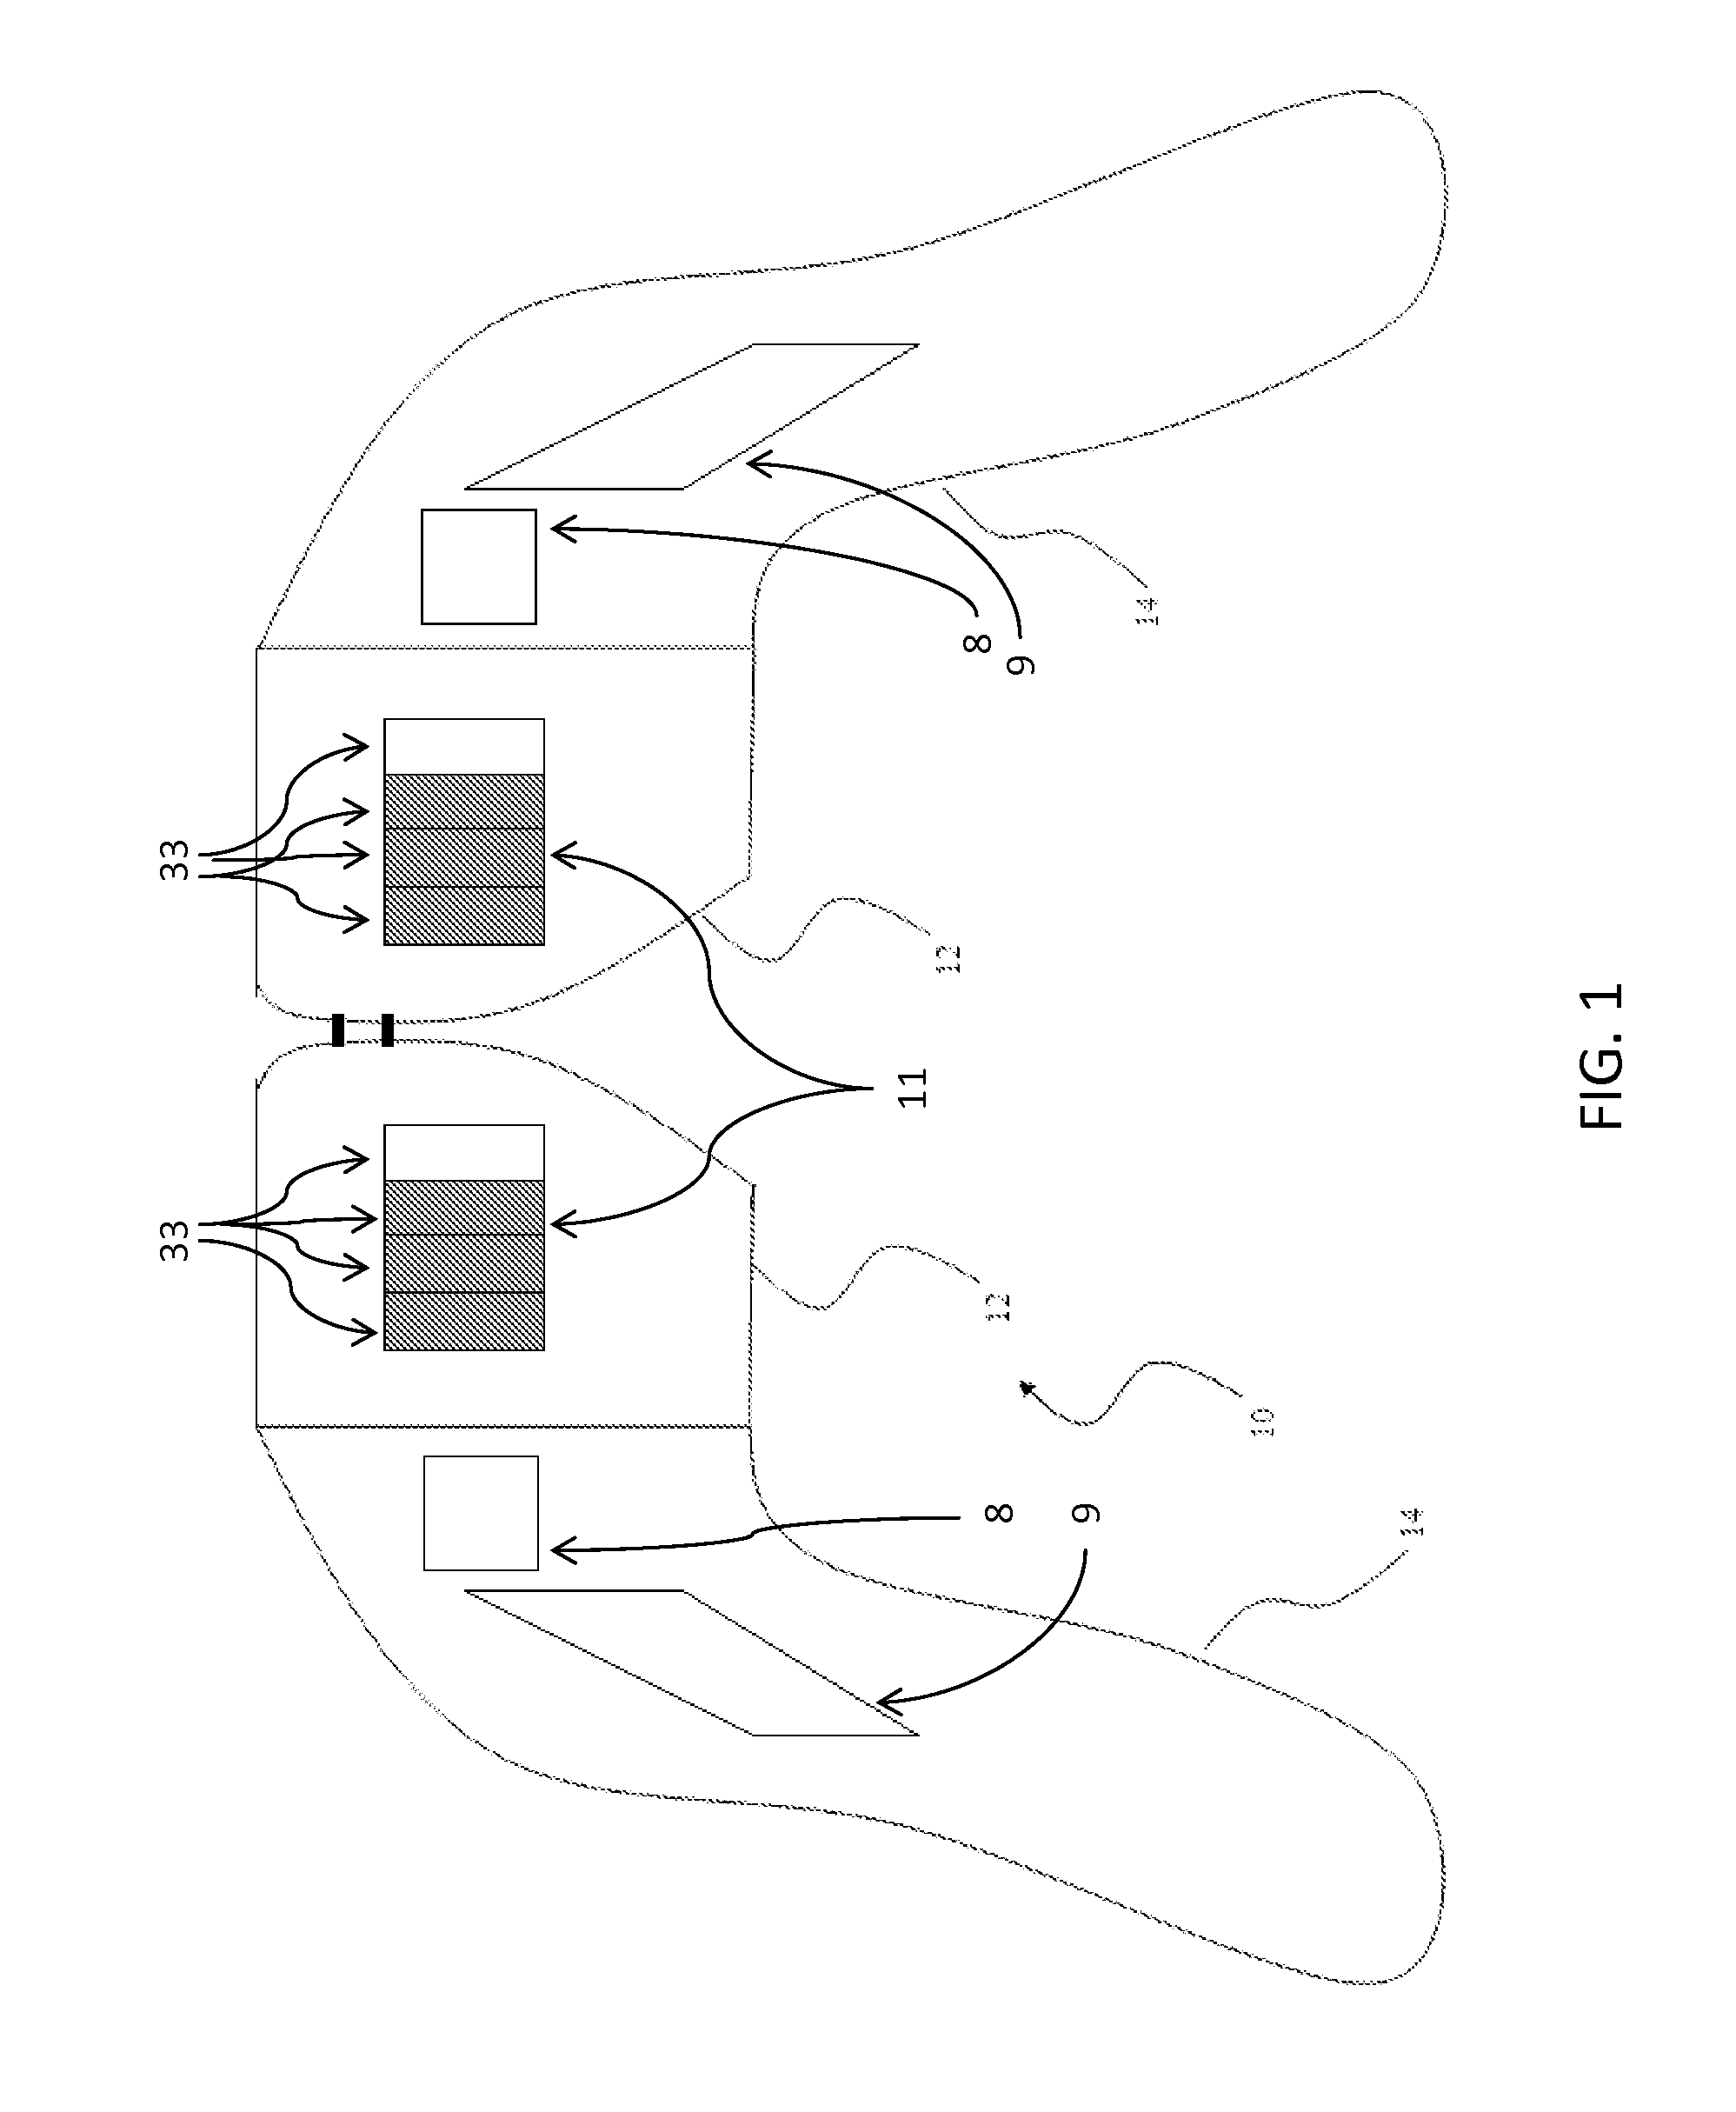 Head-mounted display control with image-content analysis